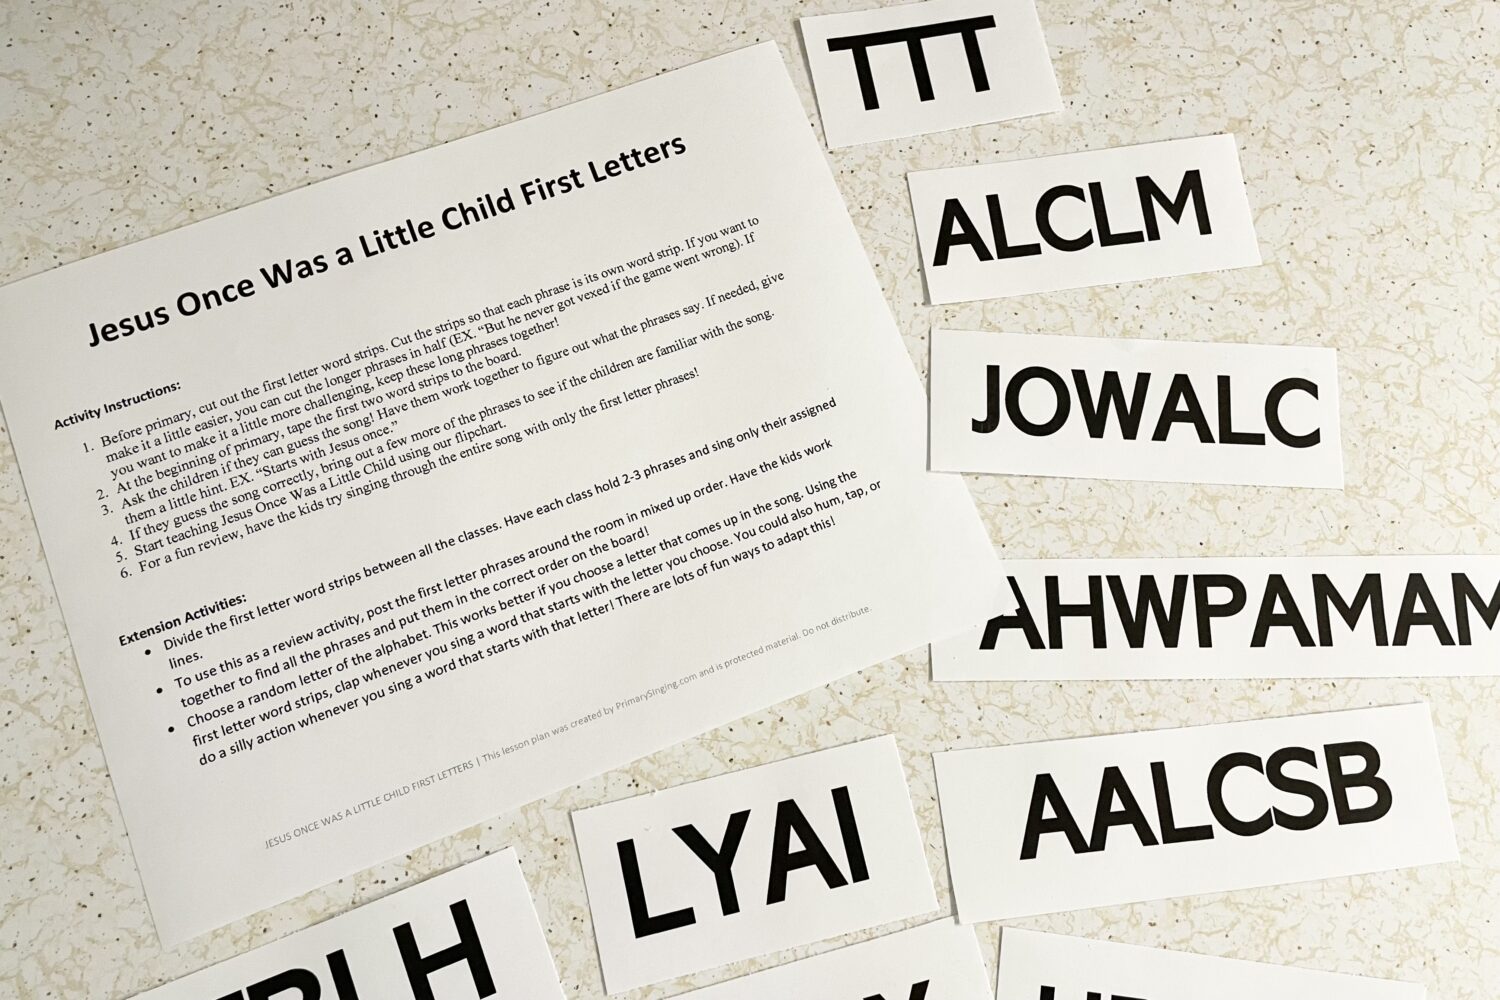 Jesus Once Was a Little Child First Letters logical activity for LDS Primary Music Leaders teaching Come Follow Me New Testament,